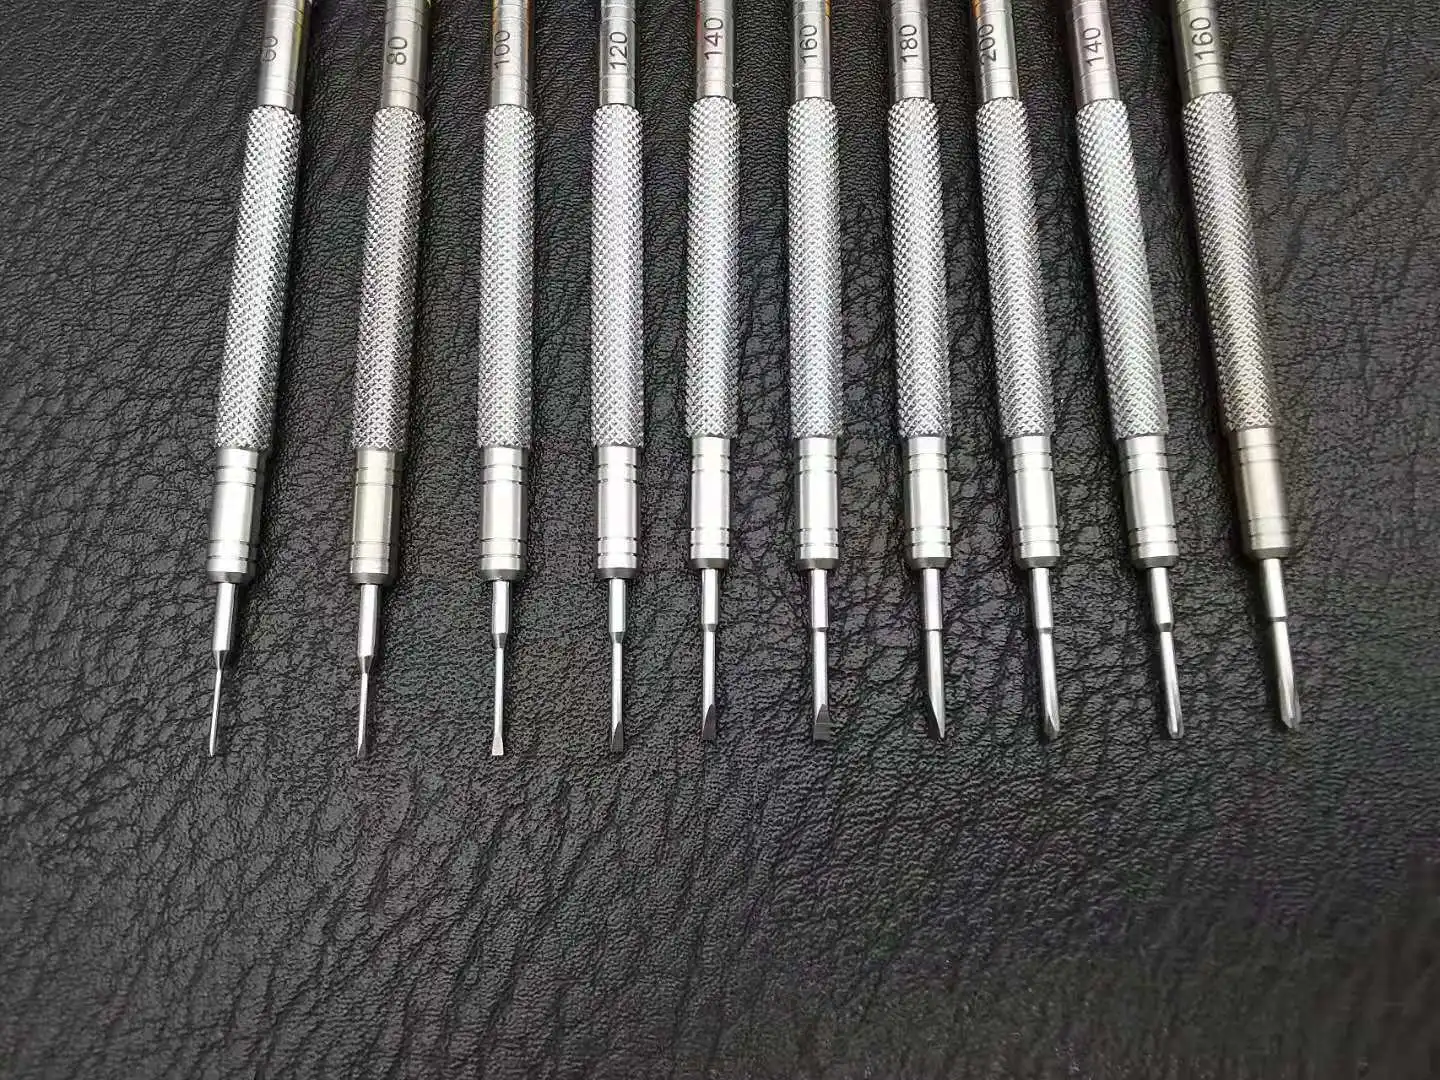 Stainless Steel High Precision Screwdrivers Set 10PCS For Watchmakers Watch Repair Tools, Plus Spare 20PCS  Blades ,Top Quality enlarge